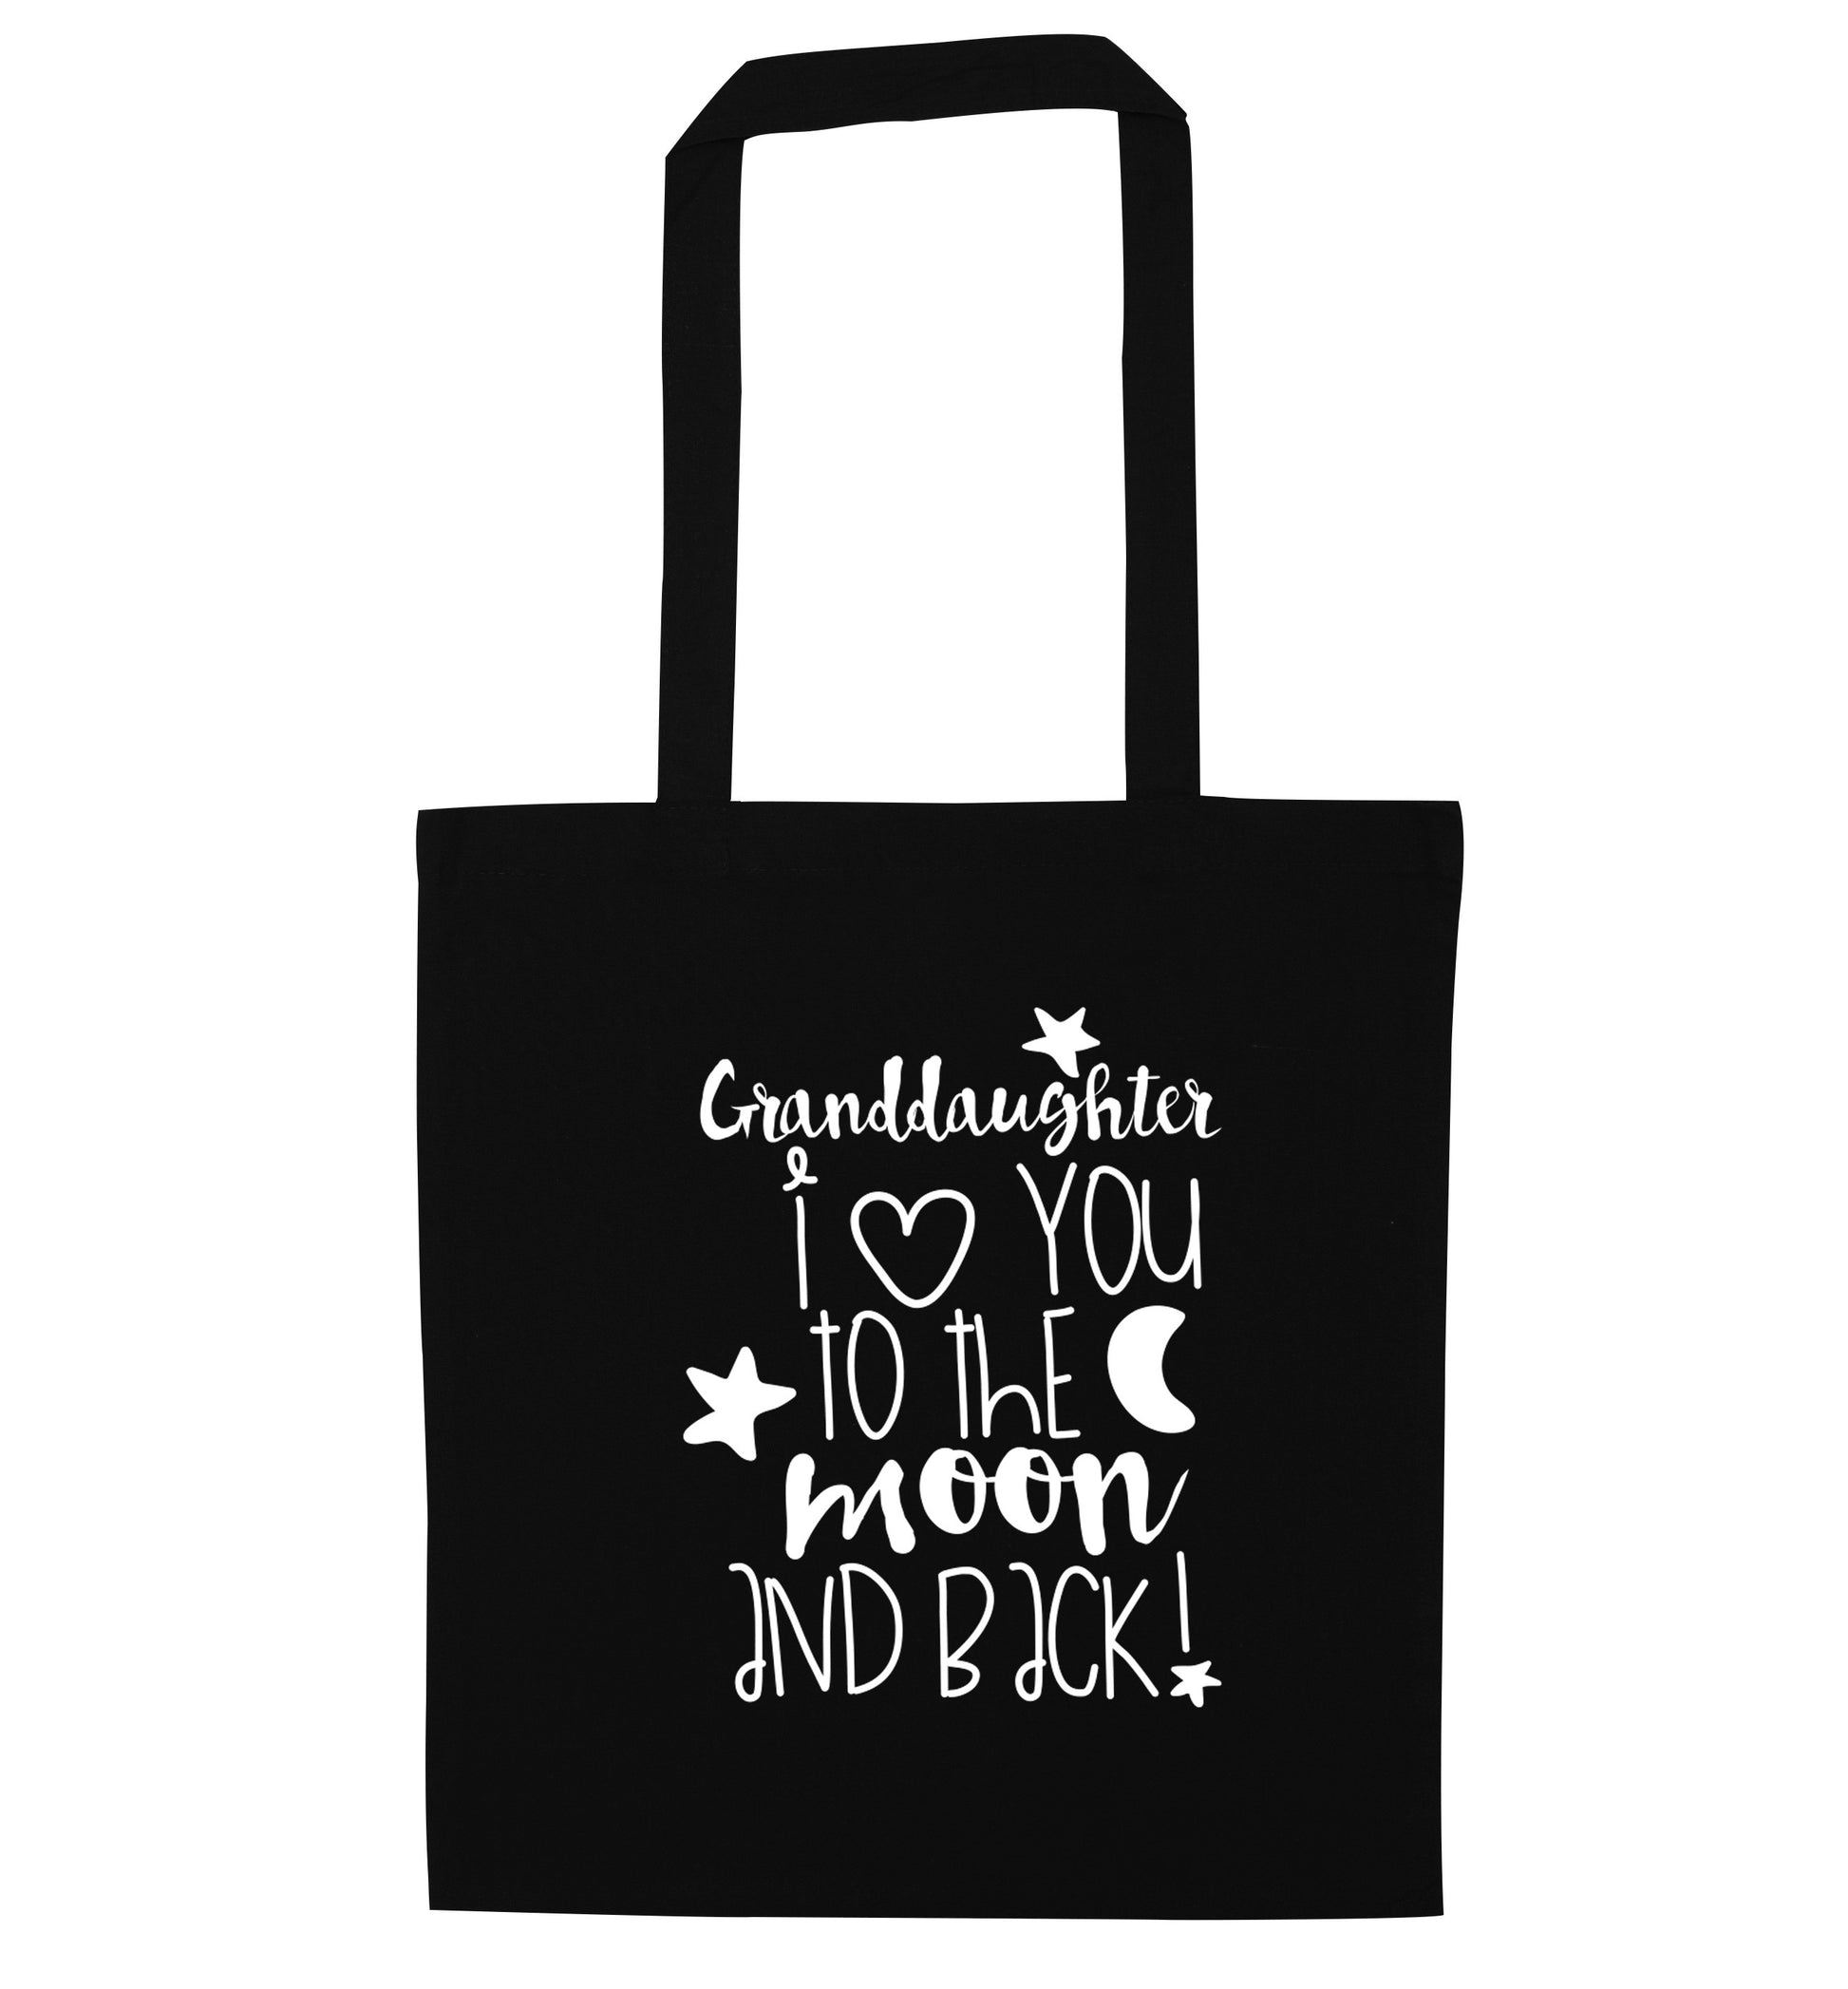 Granddaughter I love you to the moon and back black tote bag